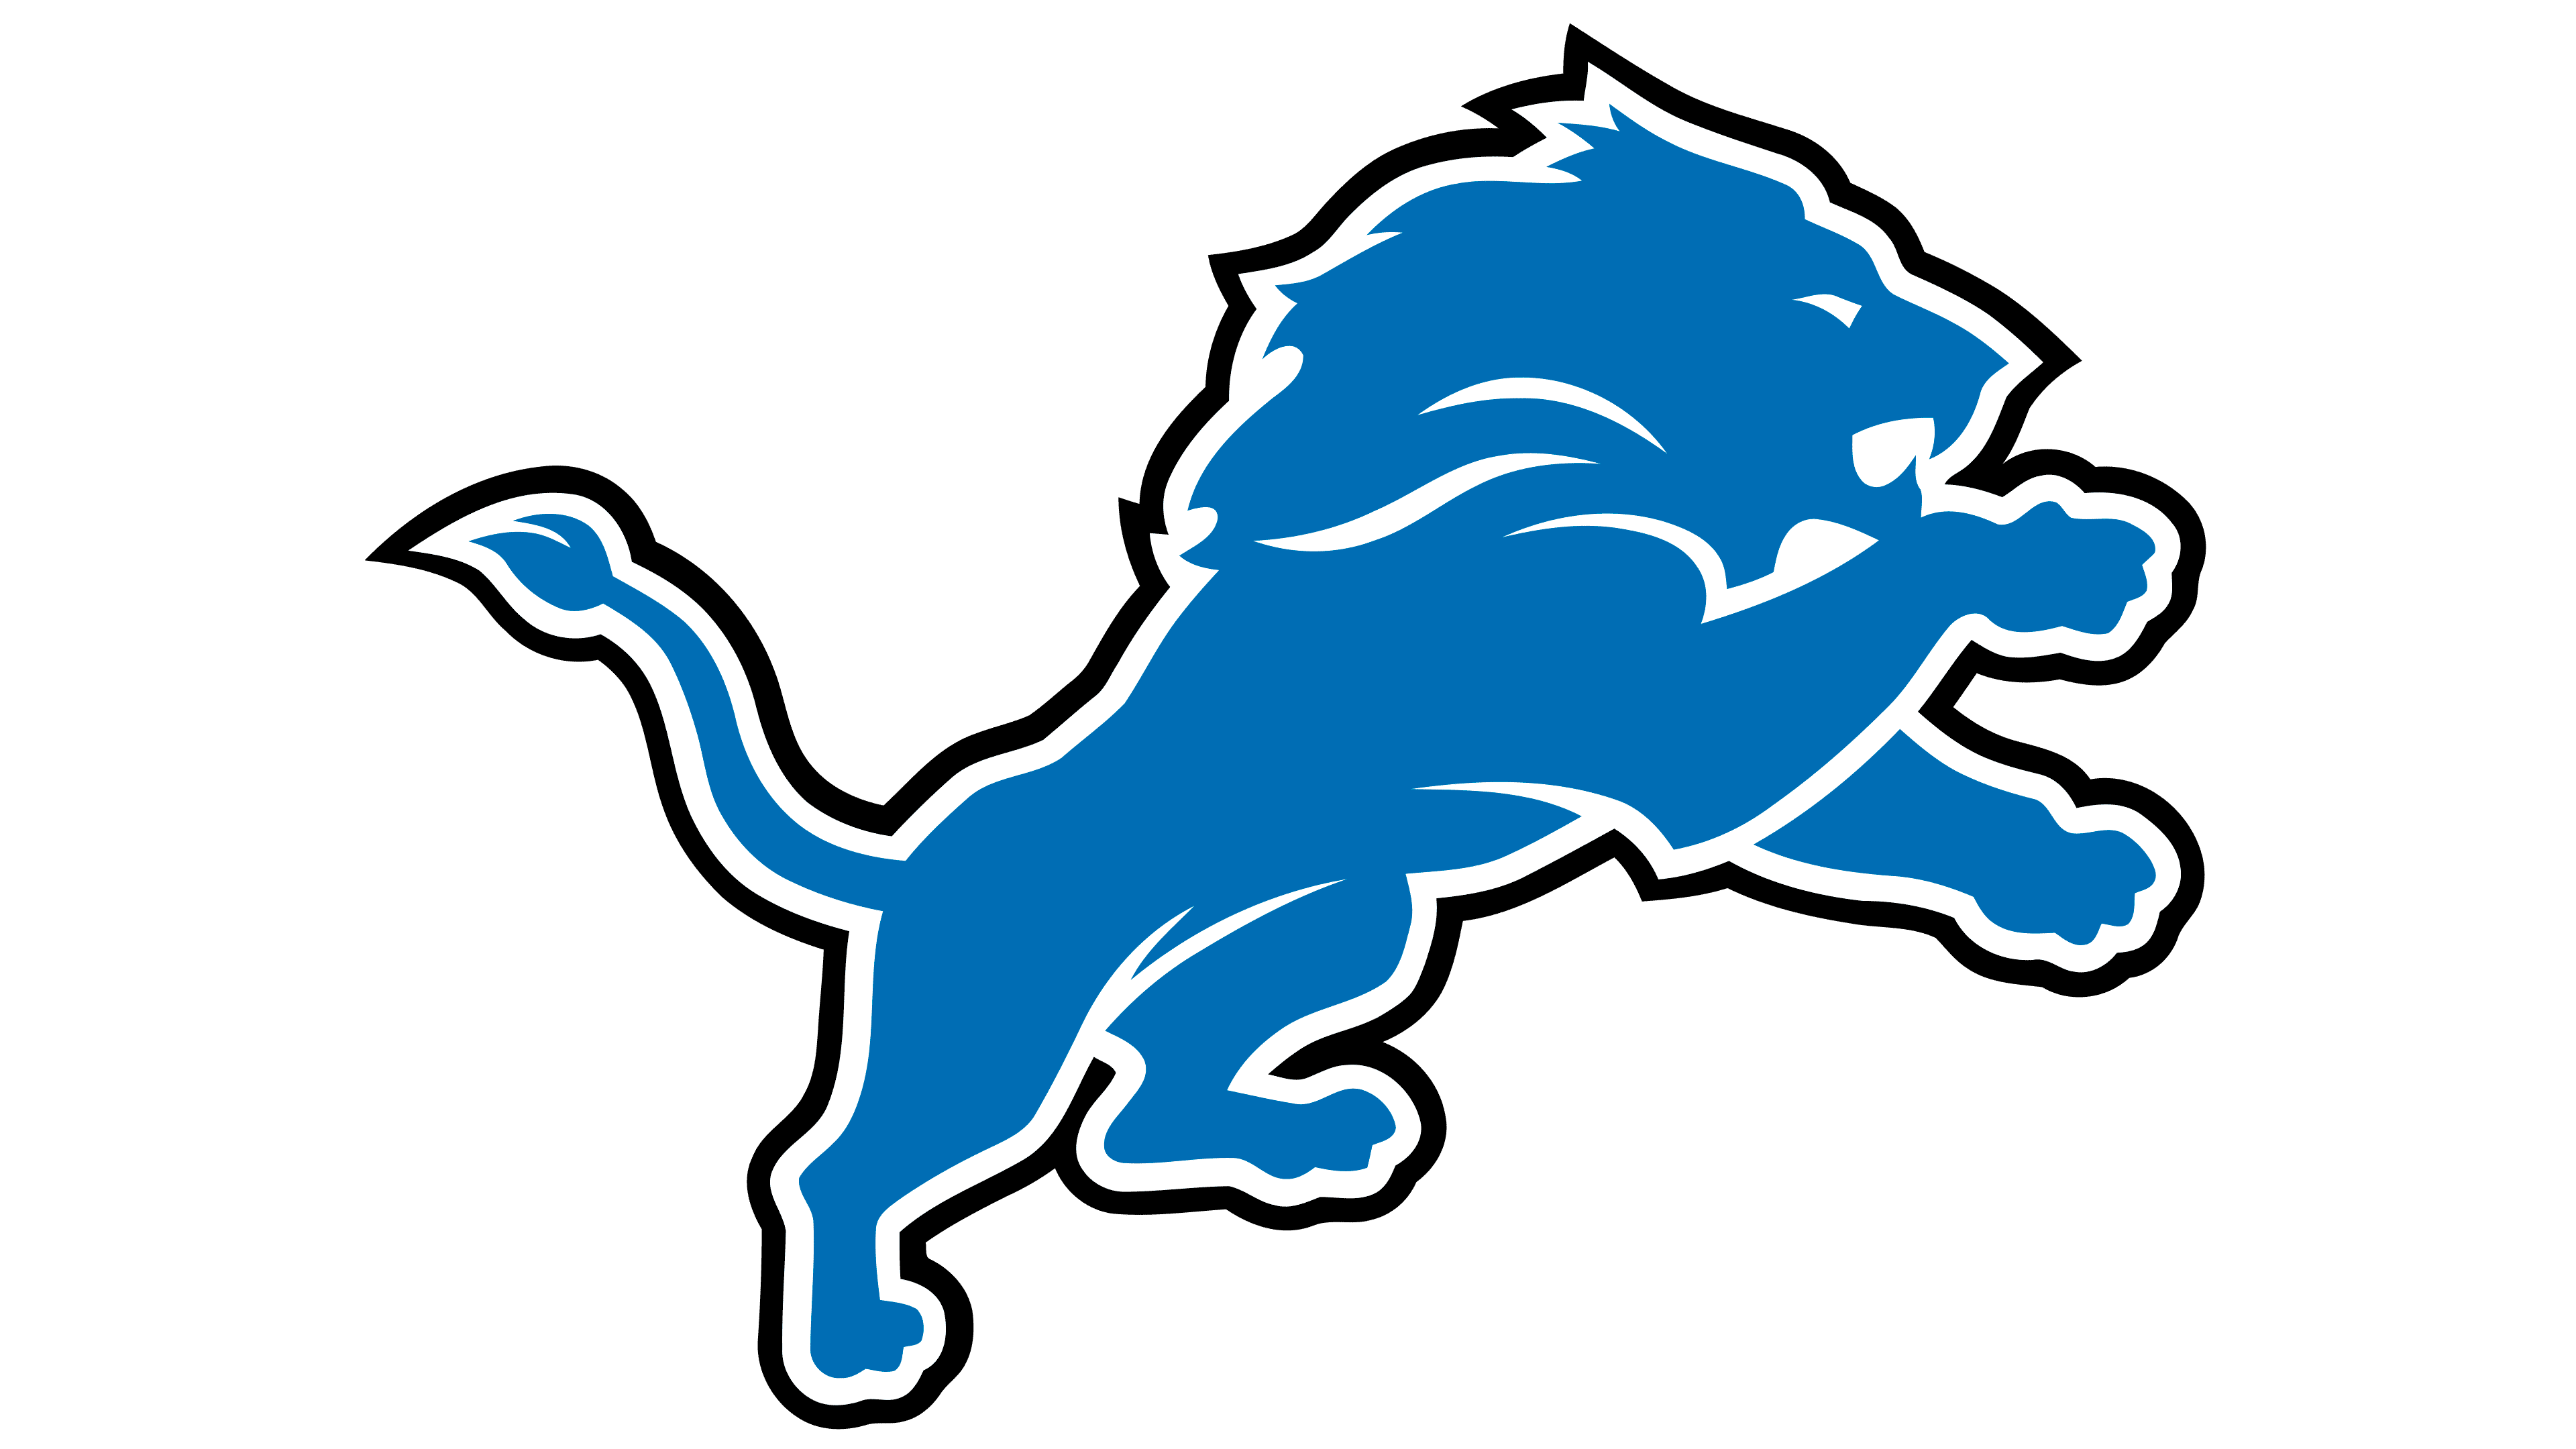 Accessories, Detroit Lions Patch Iron On Nfl Football Team Diy